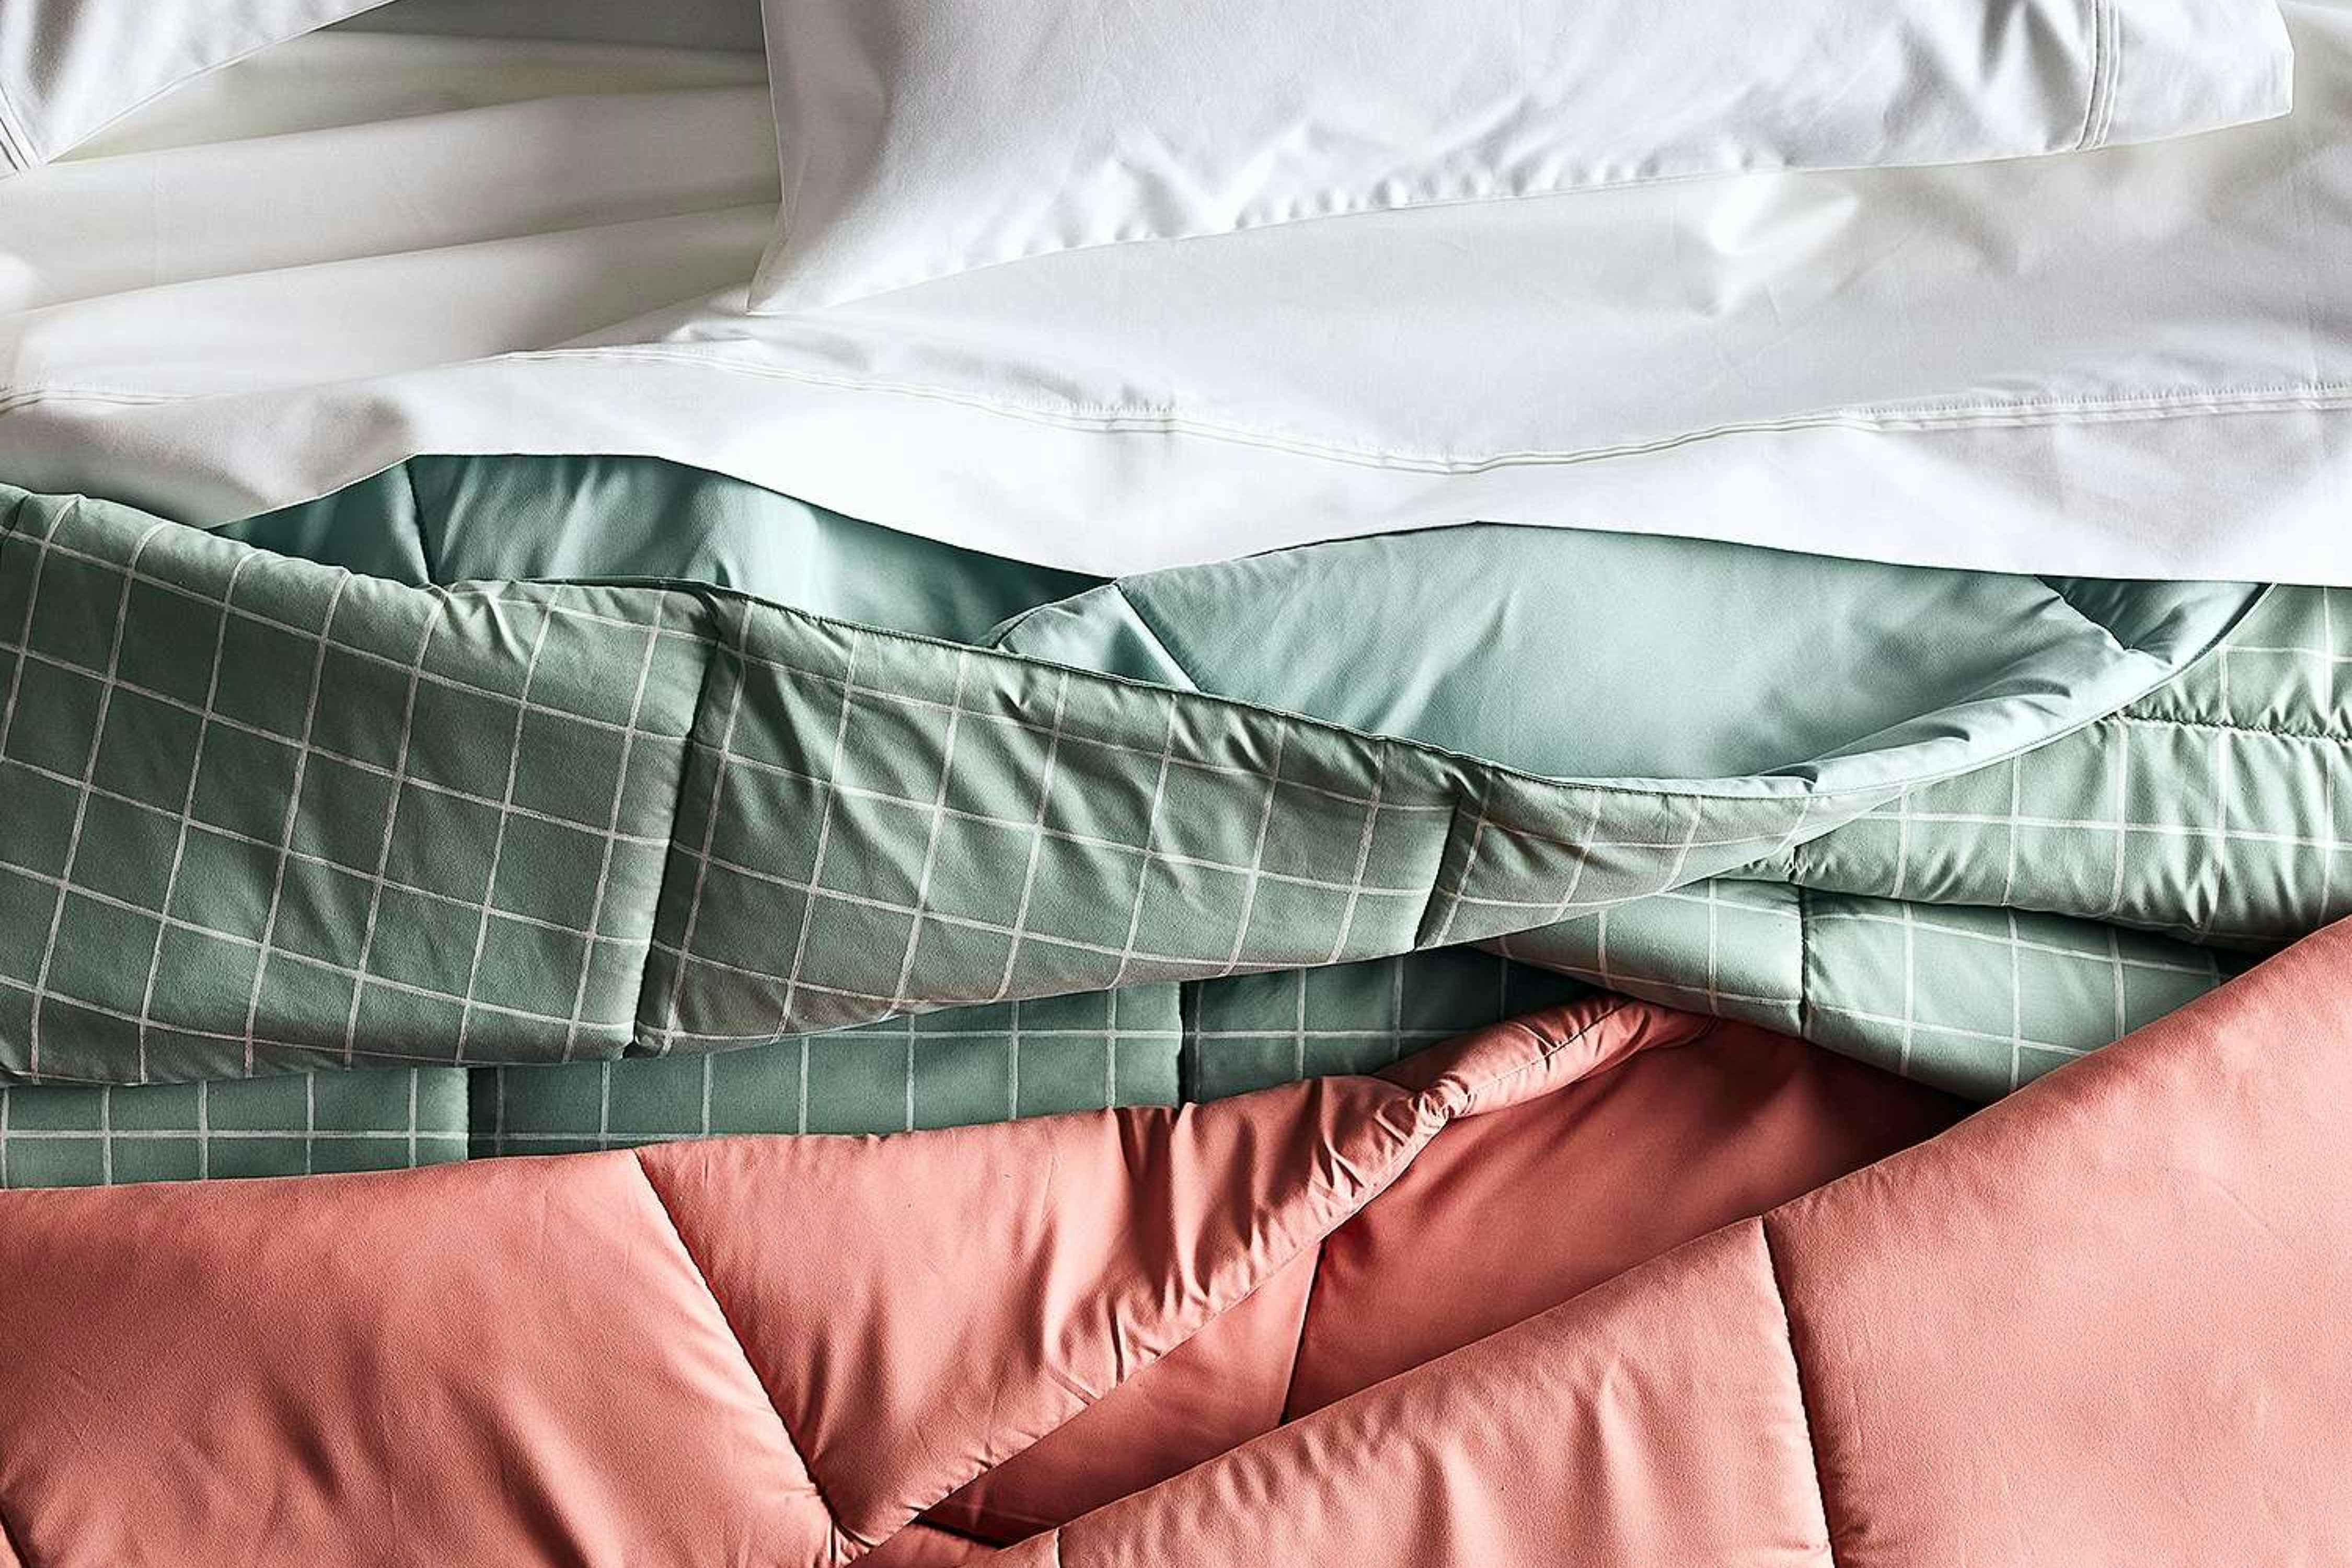 All Sizes of The Big One Comforters at Kohl's Are $24 — Over 6,000+ Reviews